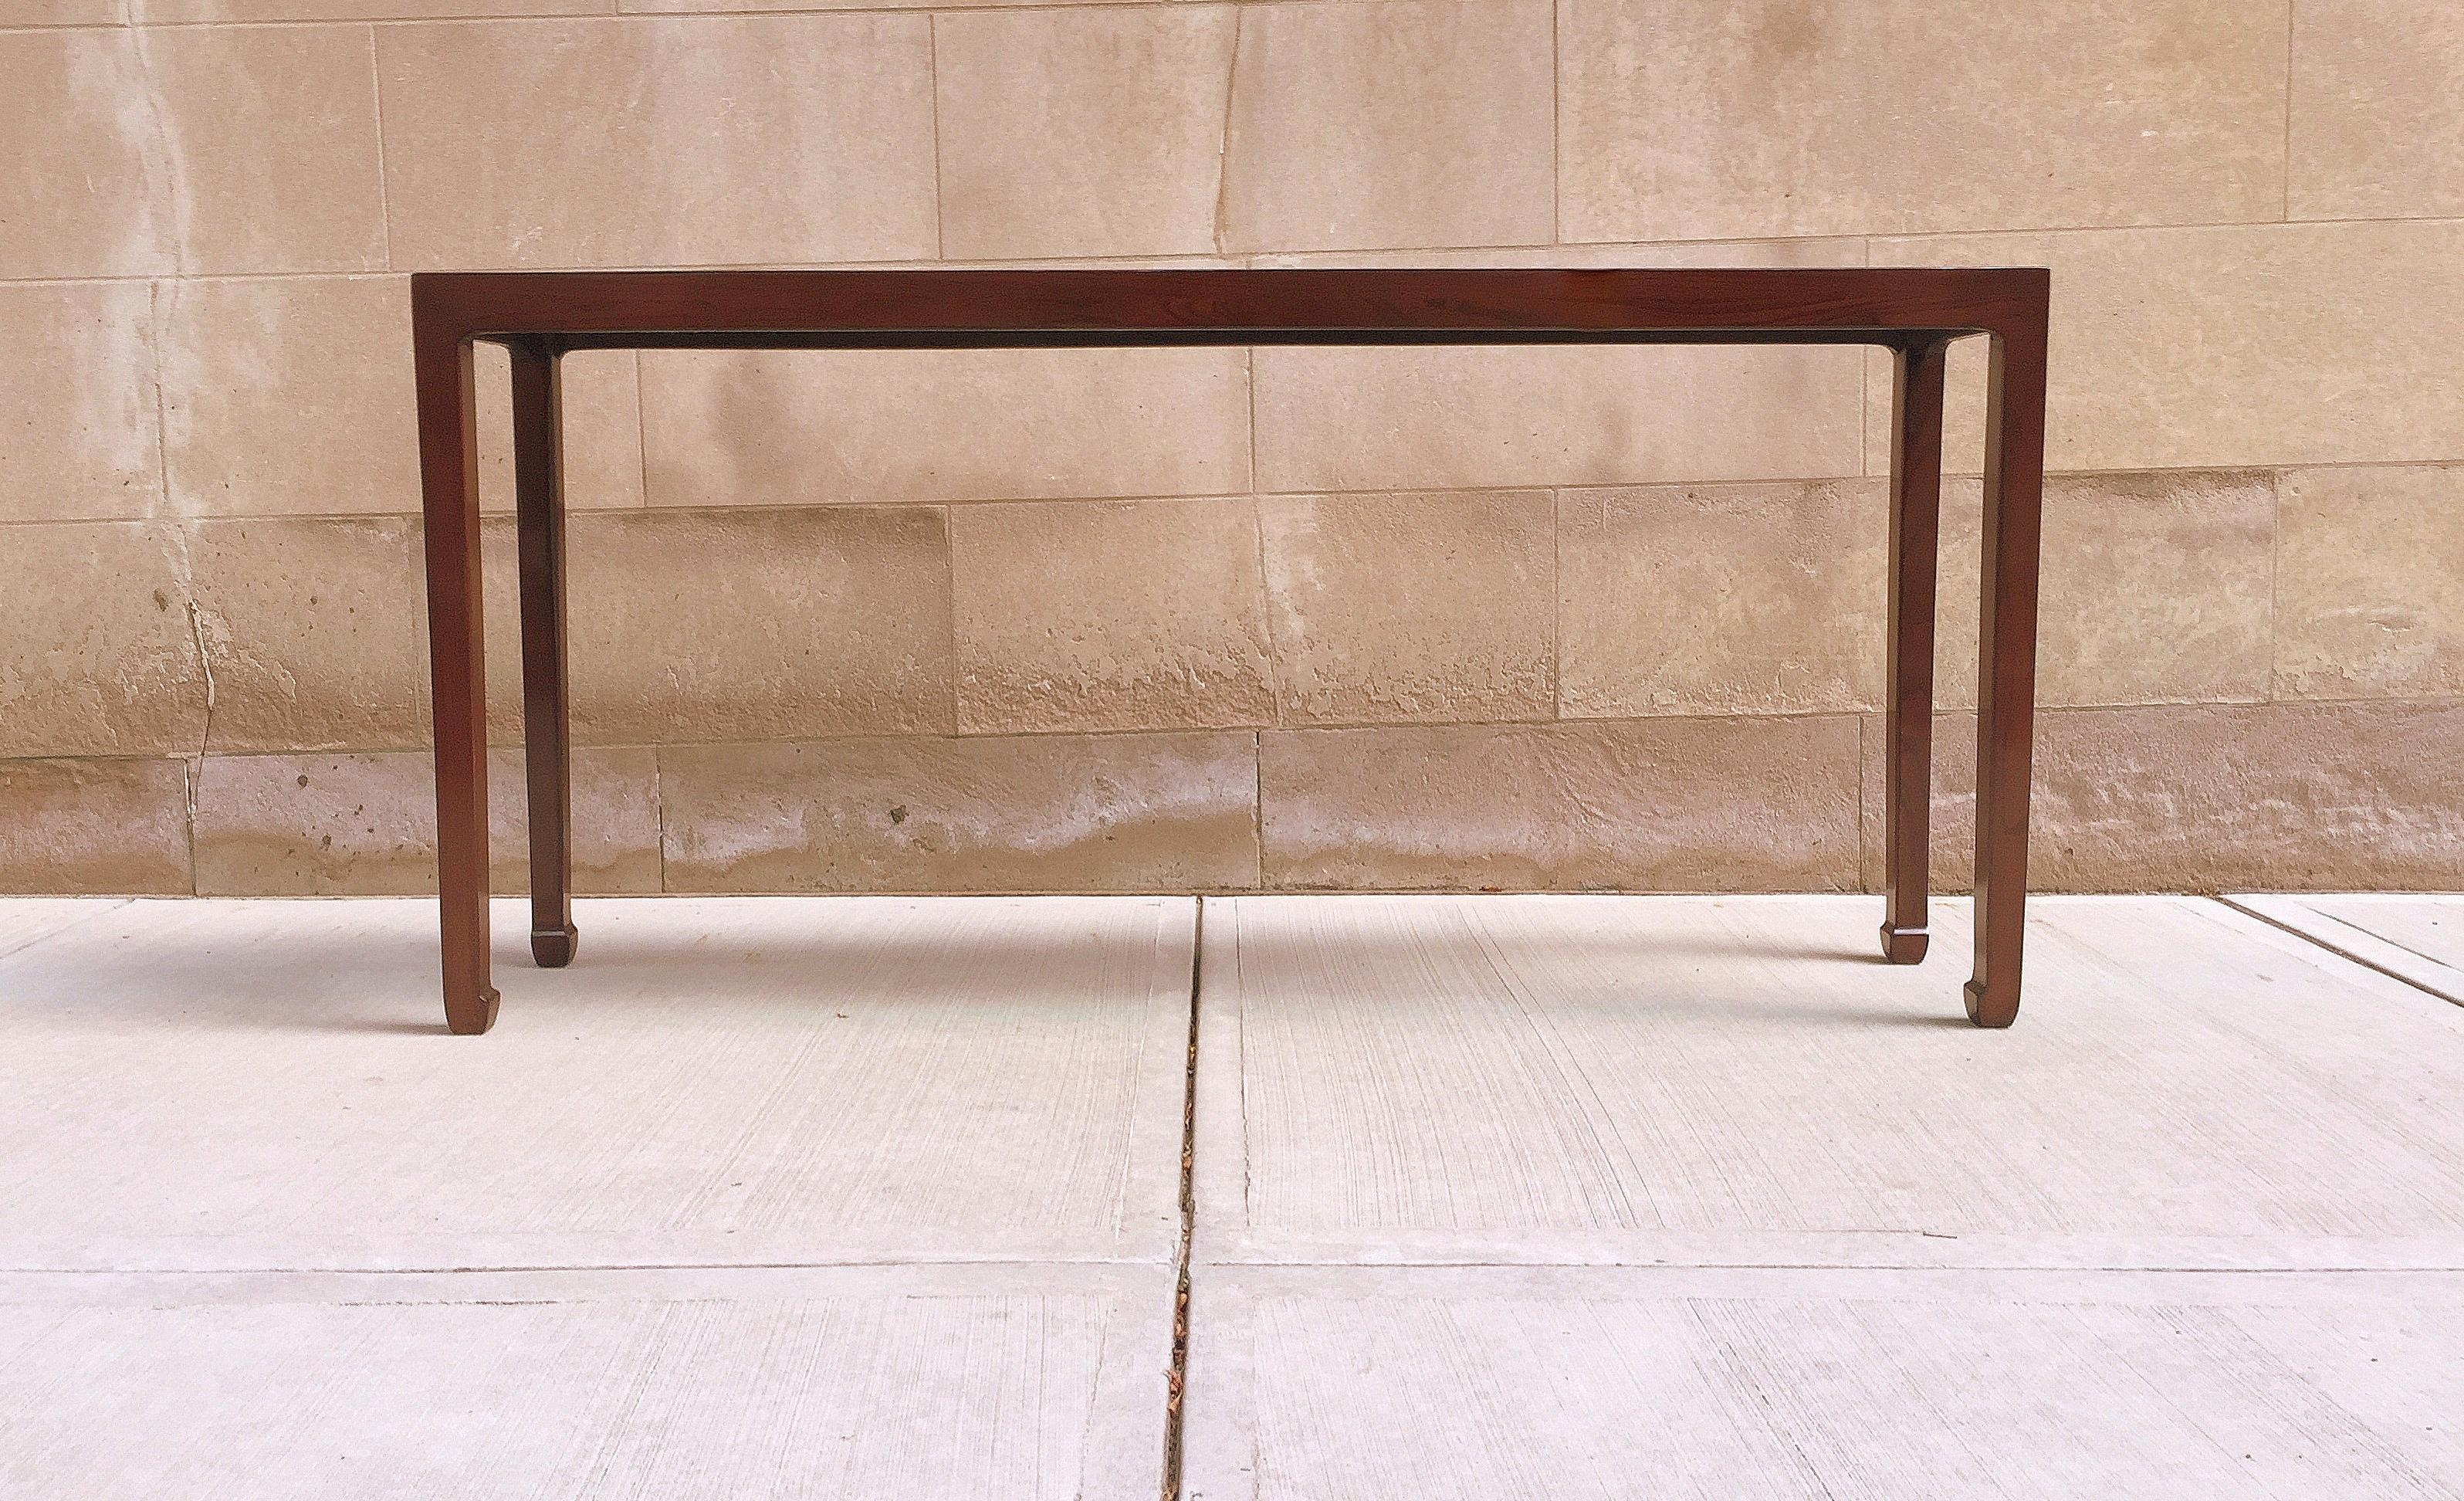 Jumu console table. Simple and elegant form with straight leg. We carry fine quality furniture with elegant finished and has been appeared many times in 